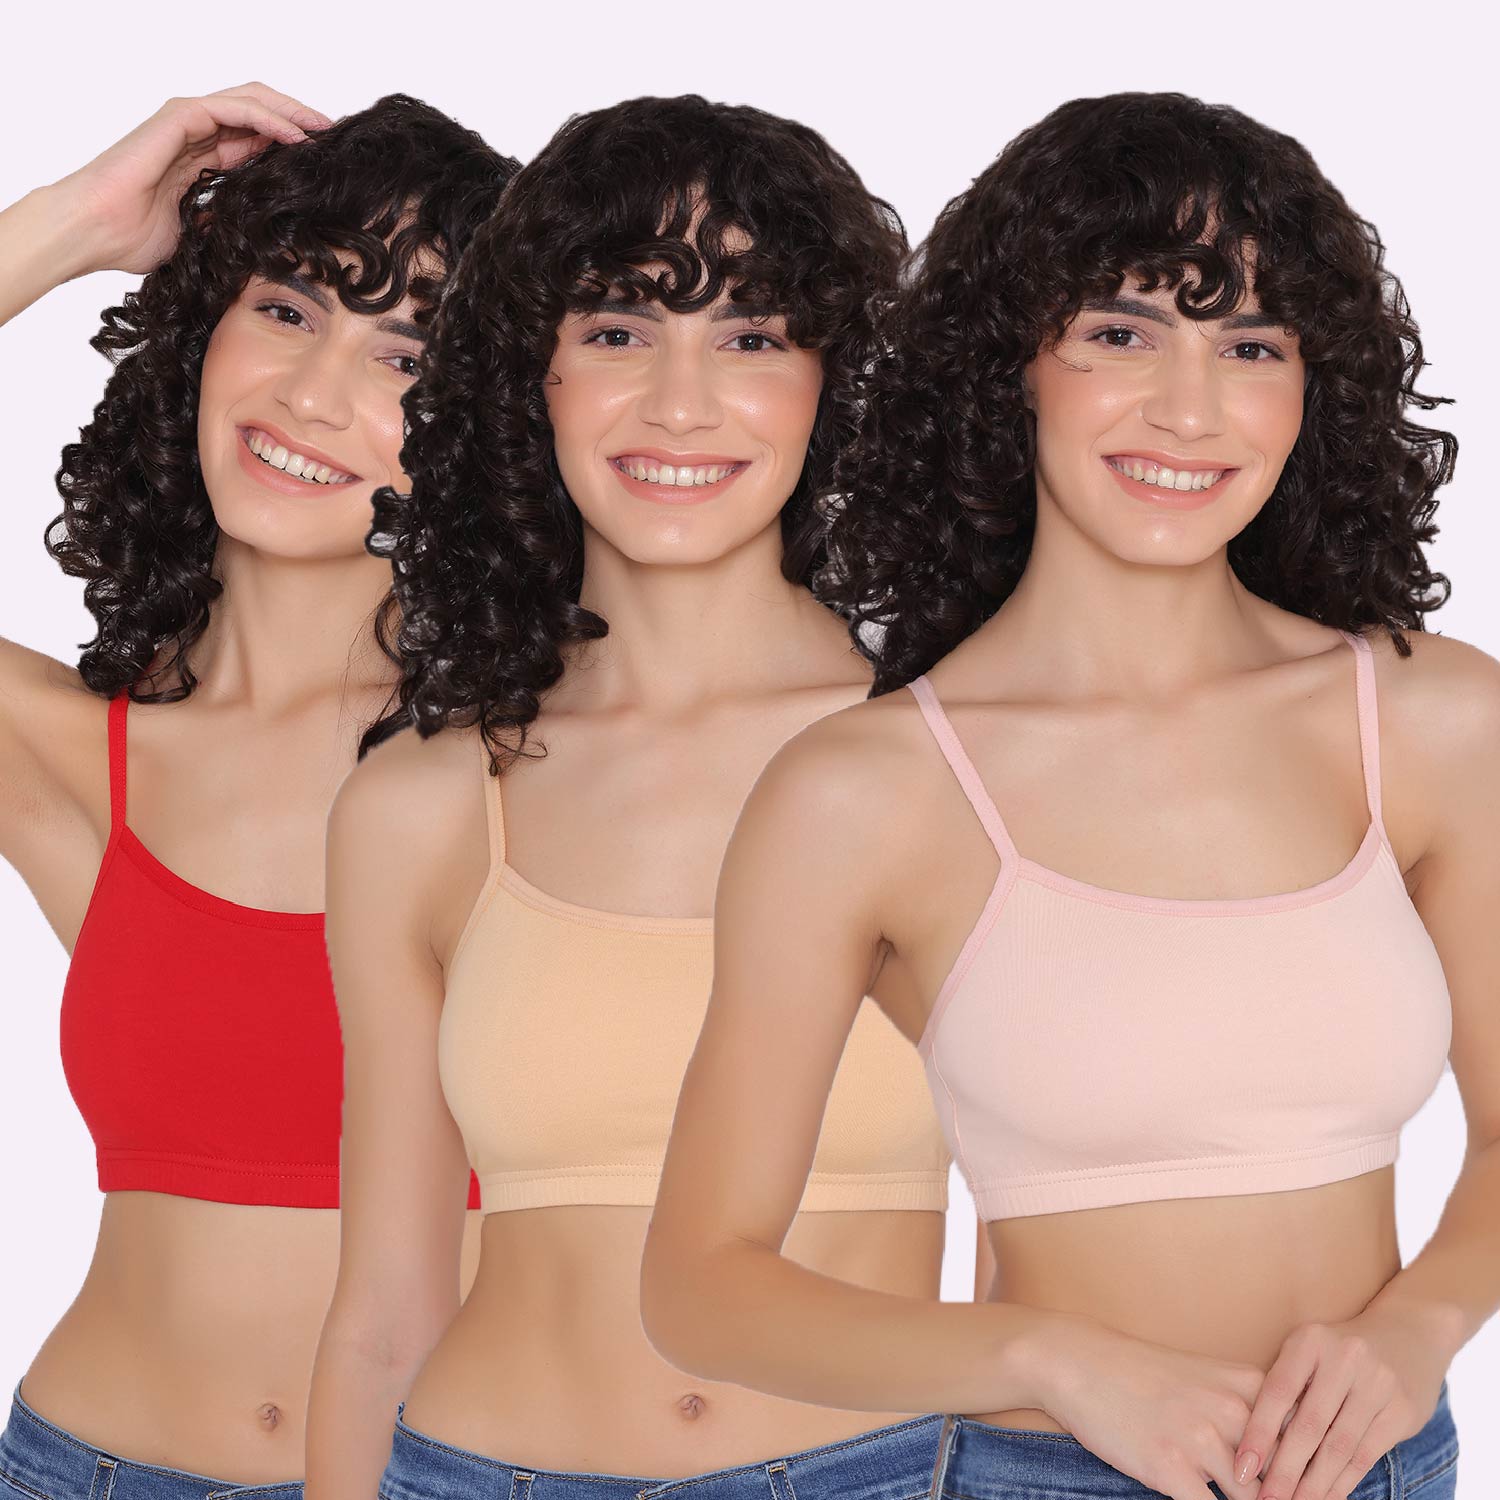 Buy Bodycare Sports Bra In Peach-Pink-Black Color - Pack Of 3 Online